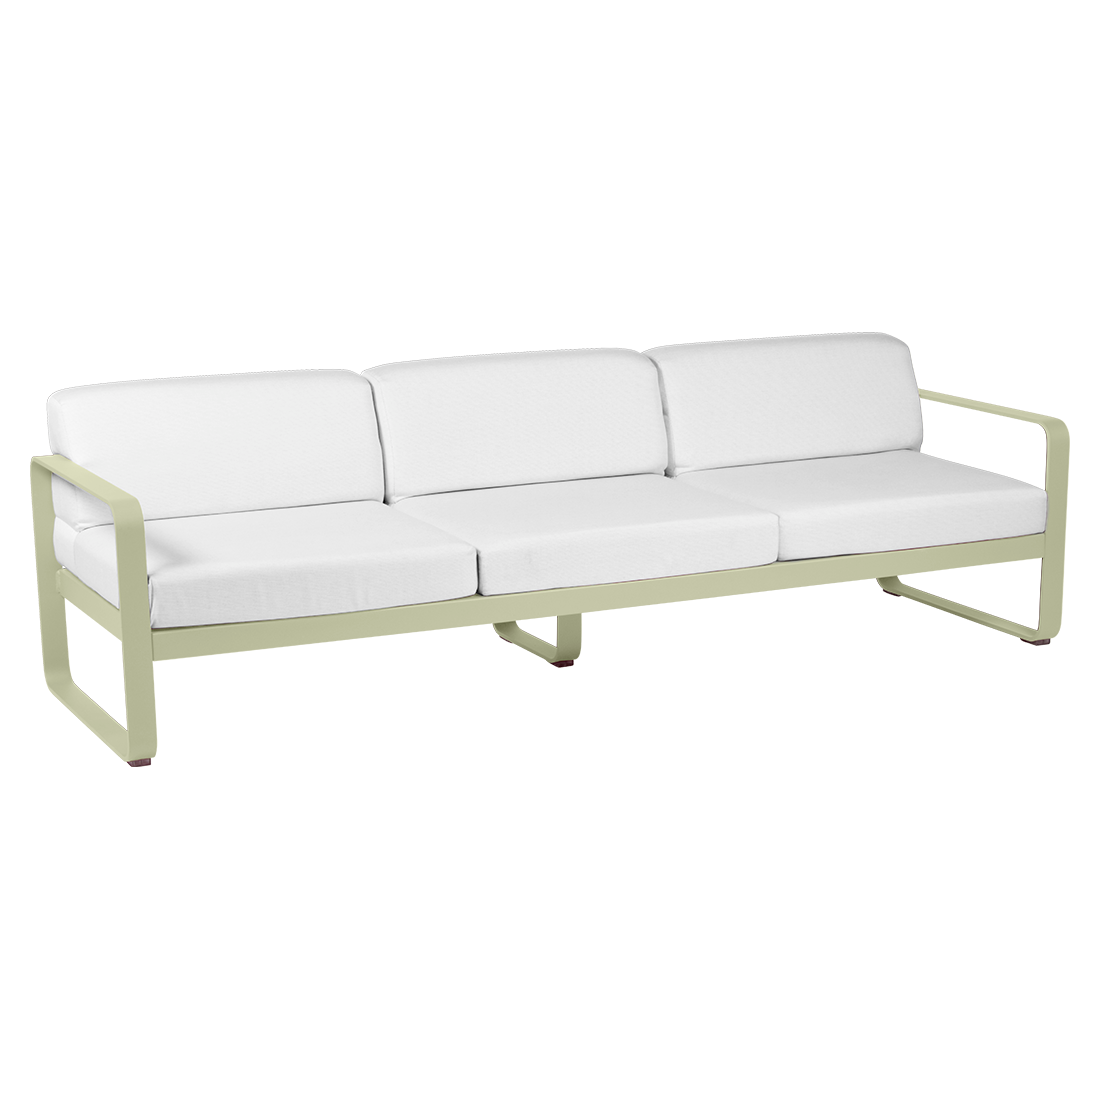 BELLEVIE 3-SEATER / OFF-WHITE CUSHION